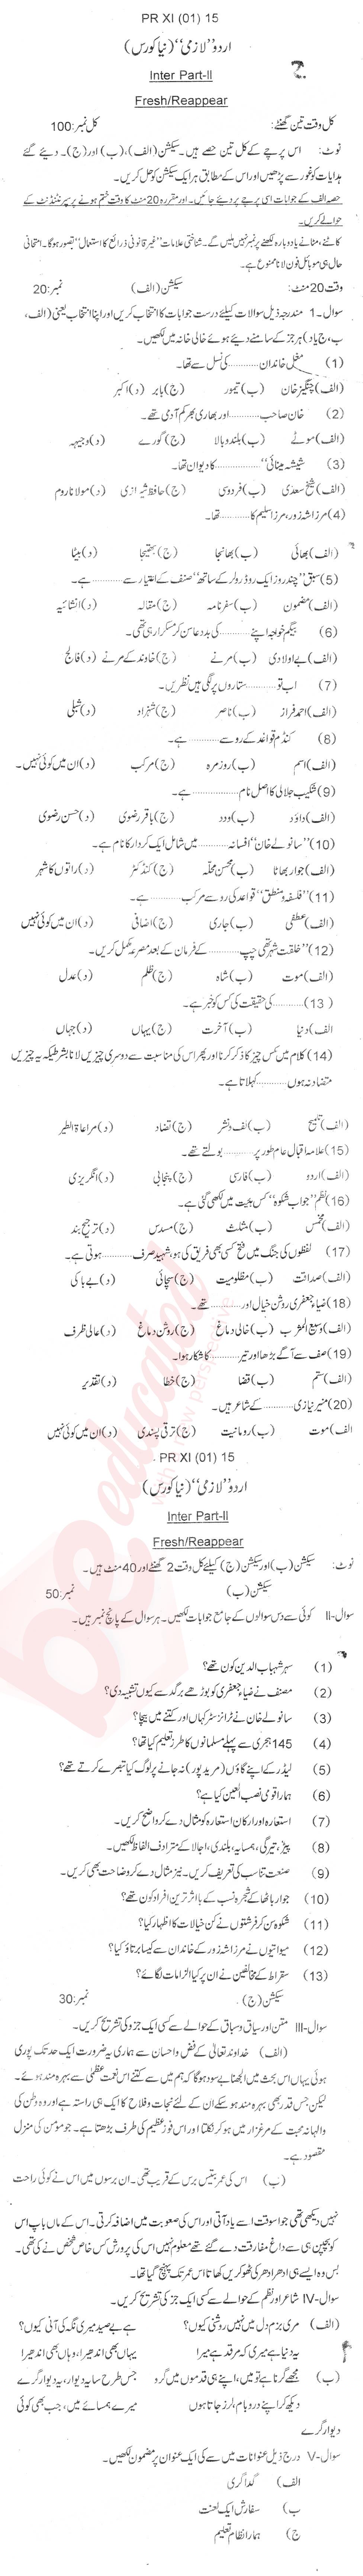 Urdu 12th class Past Paper Group 1 BISE Abbottabad 2015